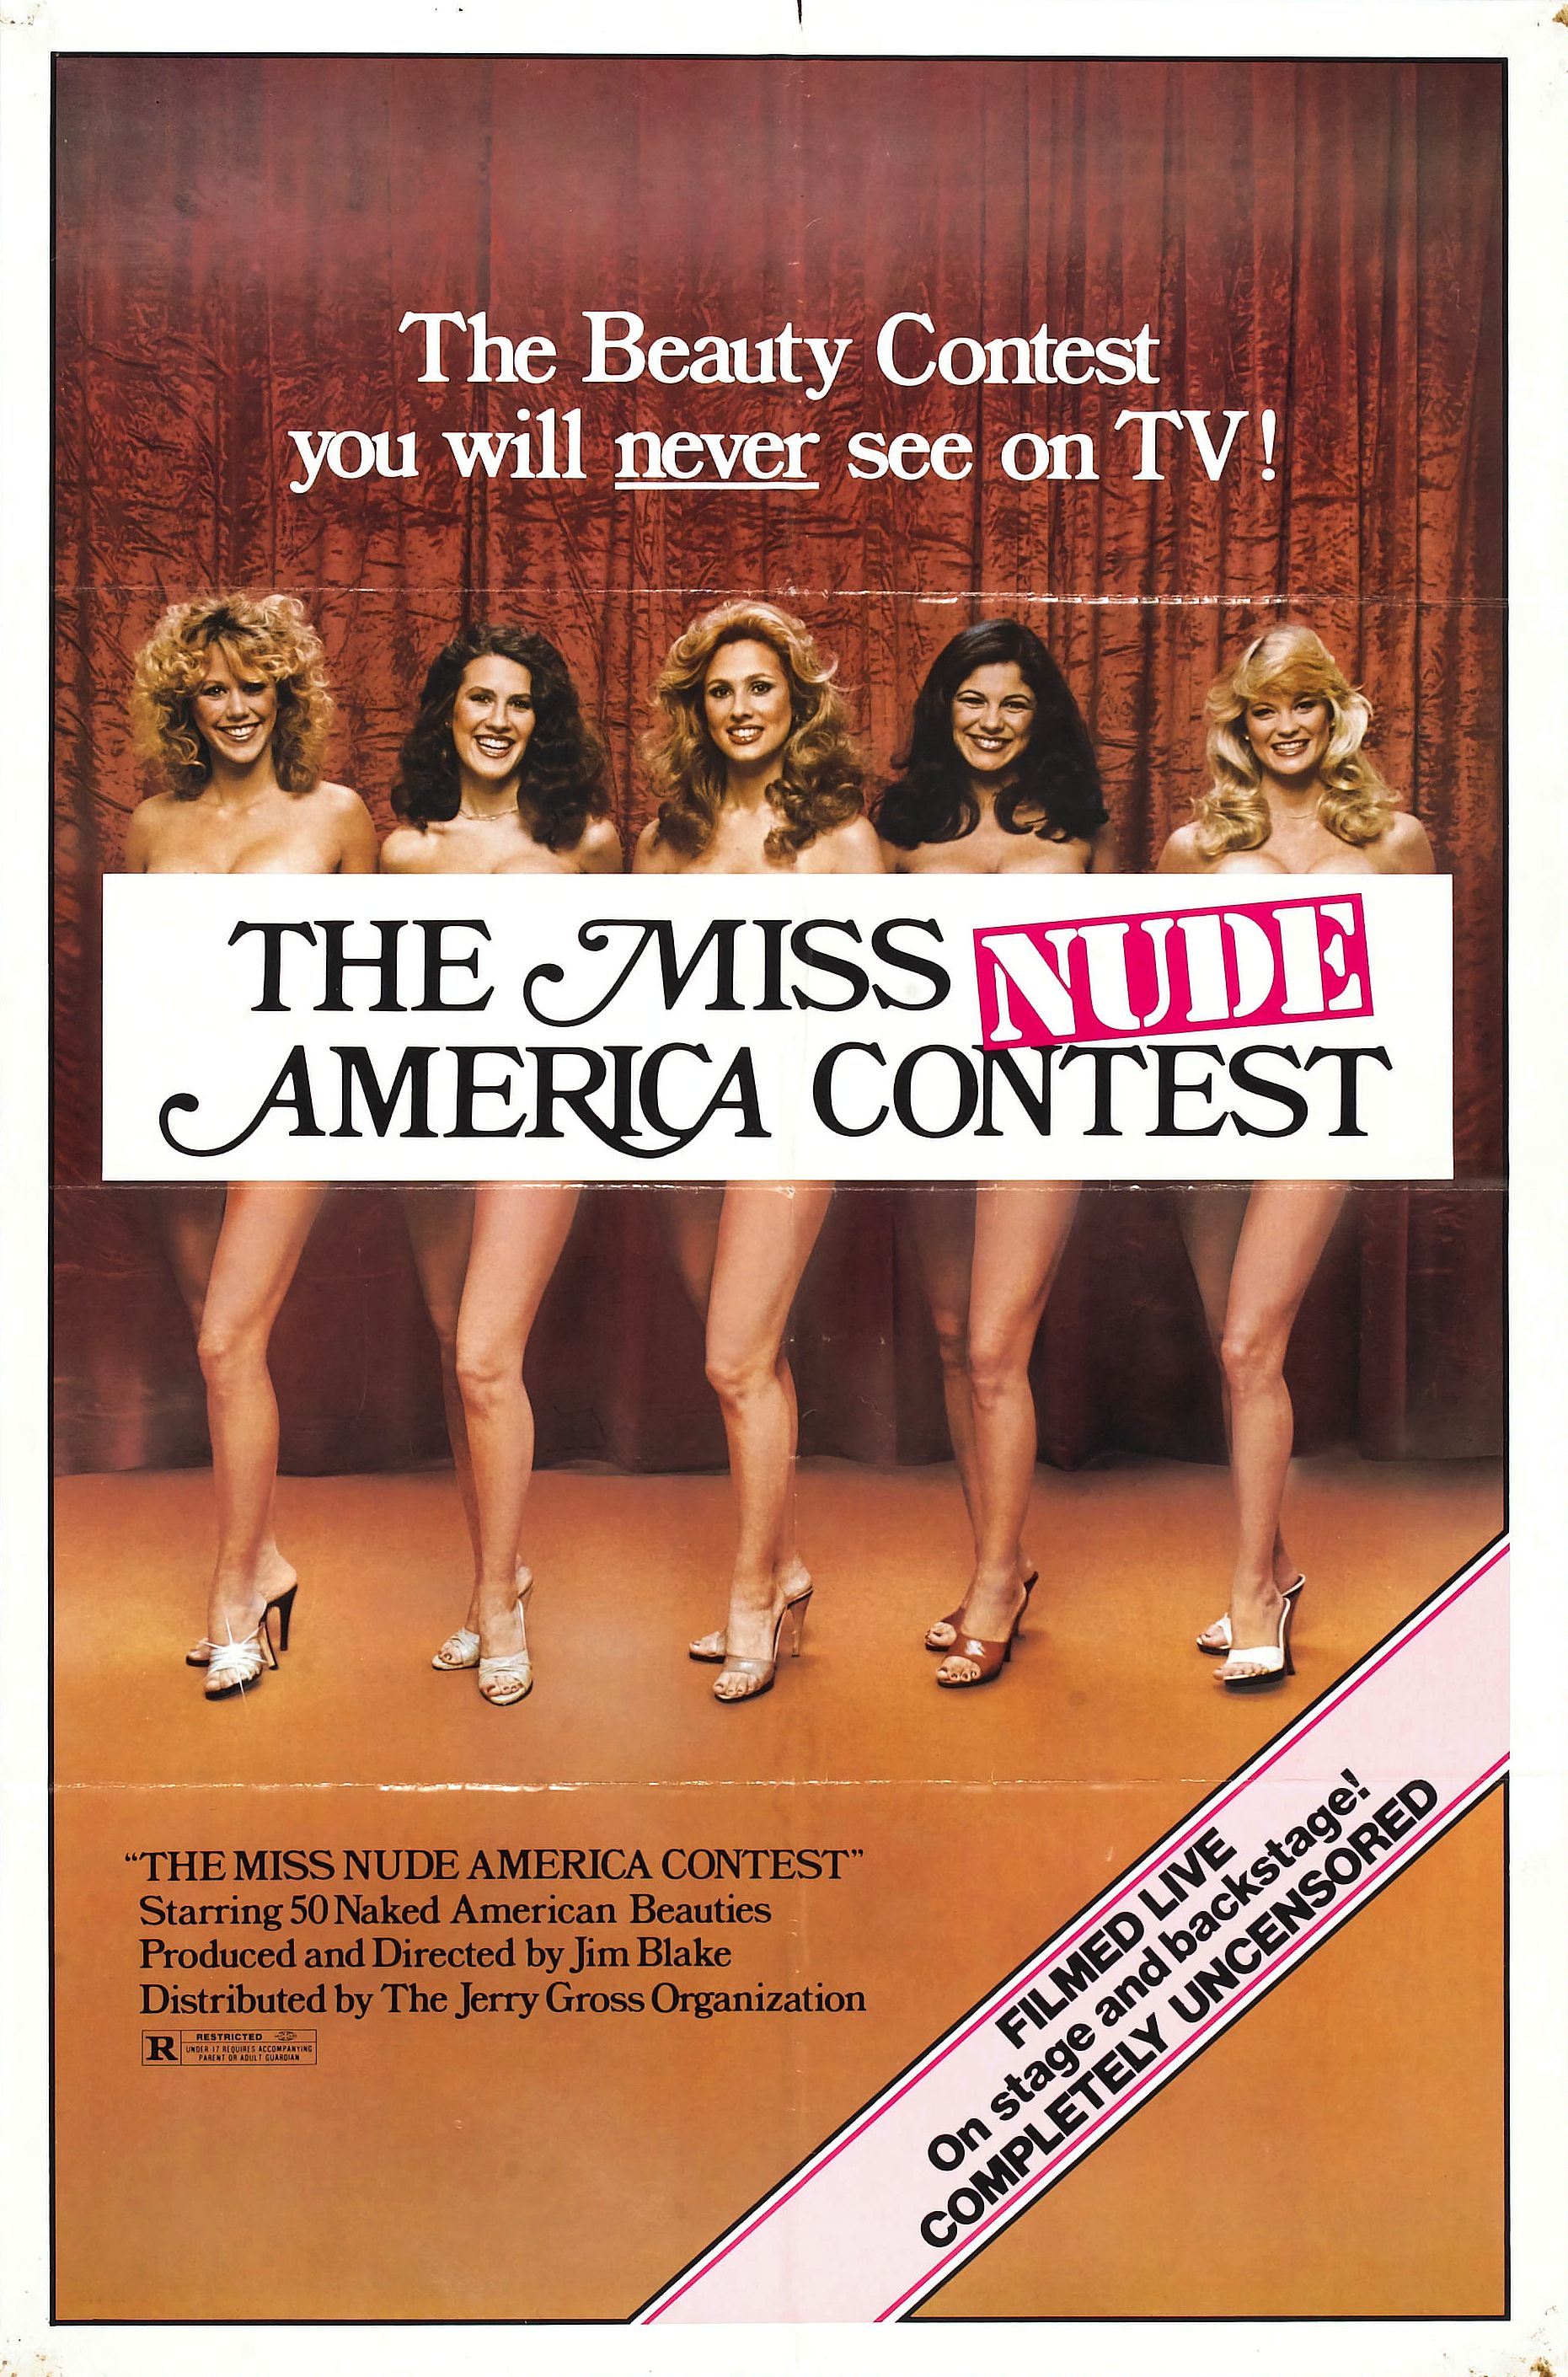 alyssa babin recommends Miss Nude America Pictures